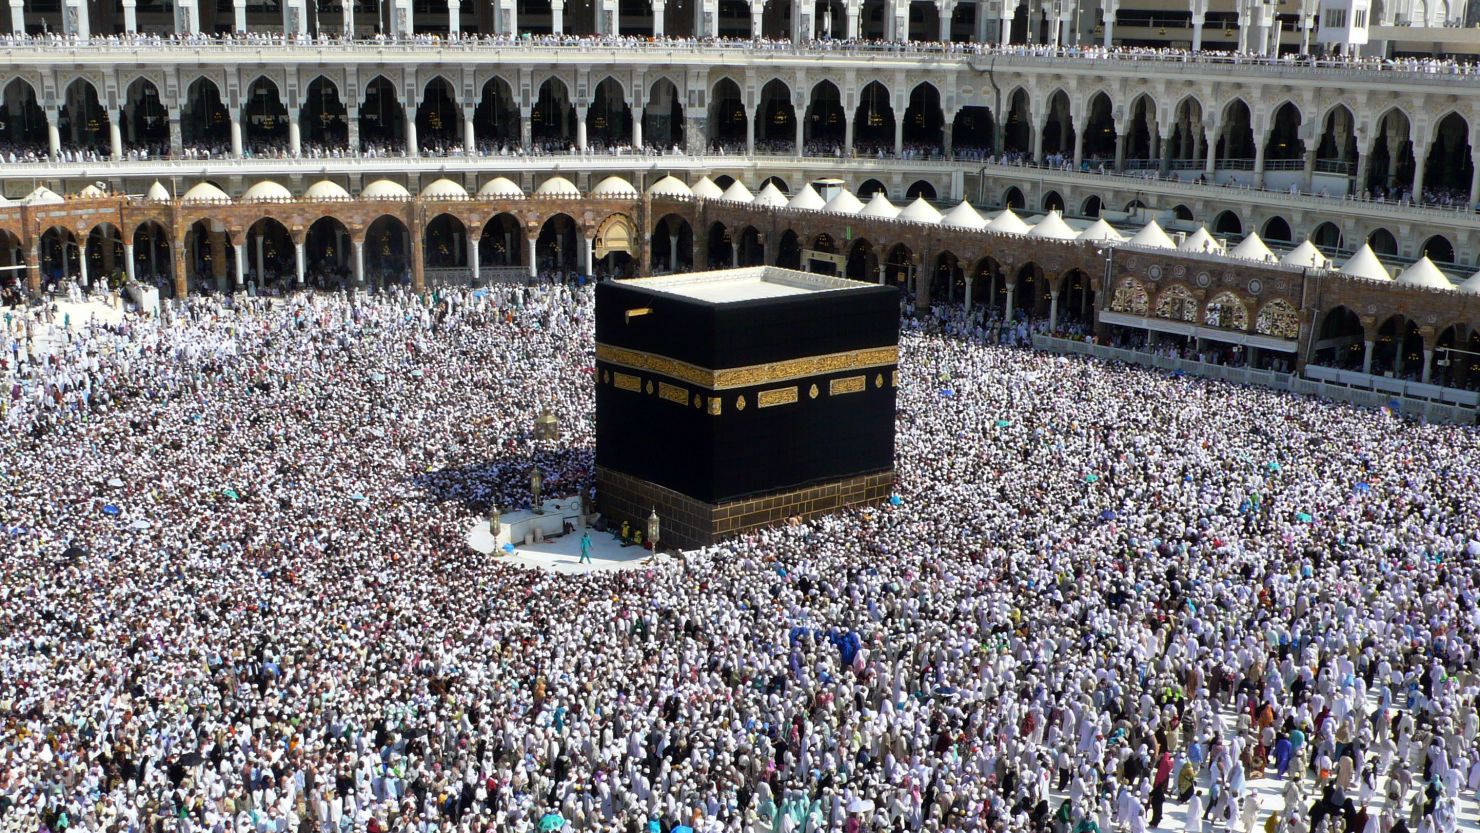 Muslim pilgrims perform the final walk around the Kaaba at the Grand Mosque in Mecca on November 30, 2009.